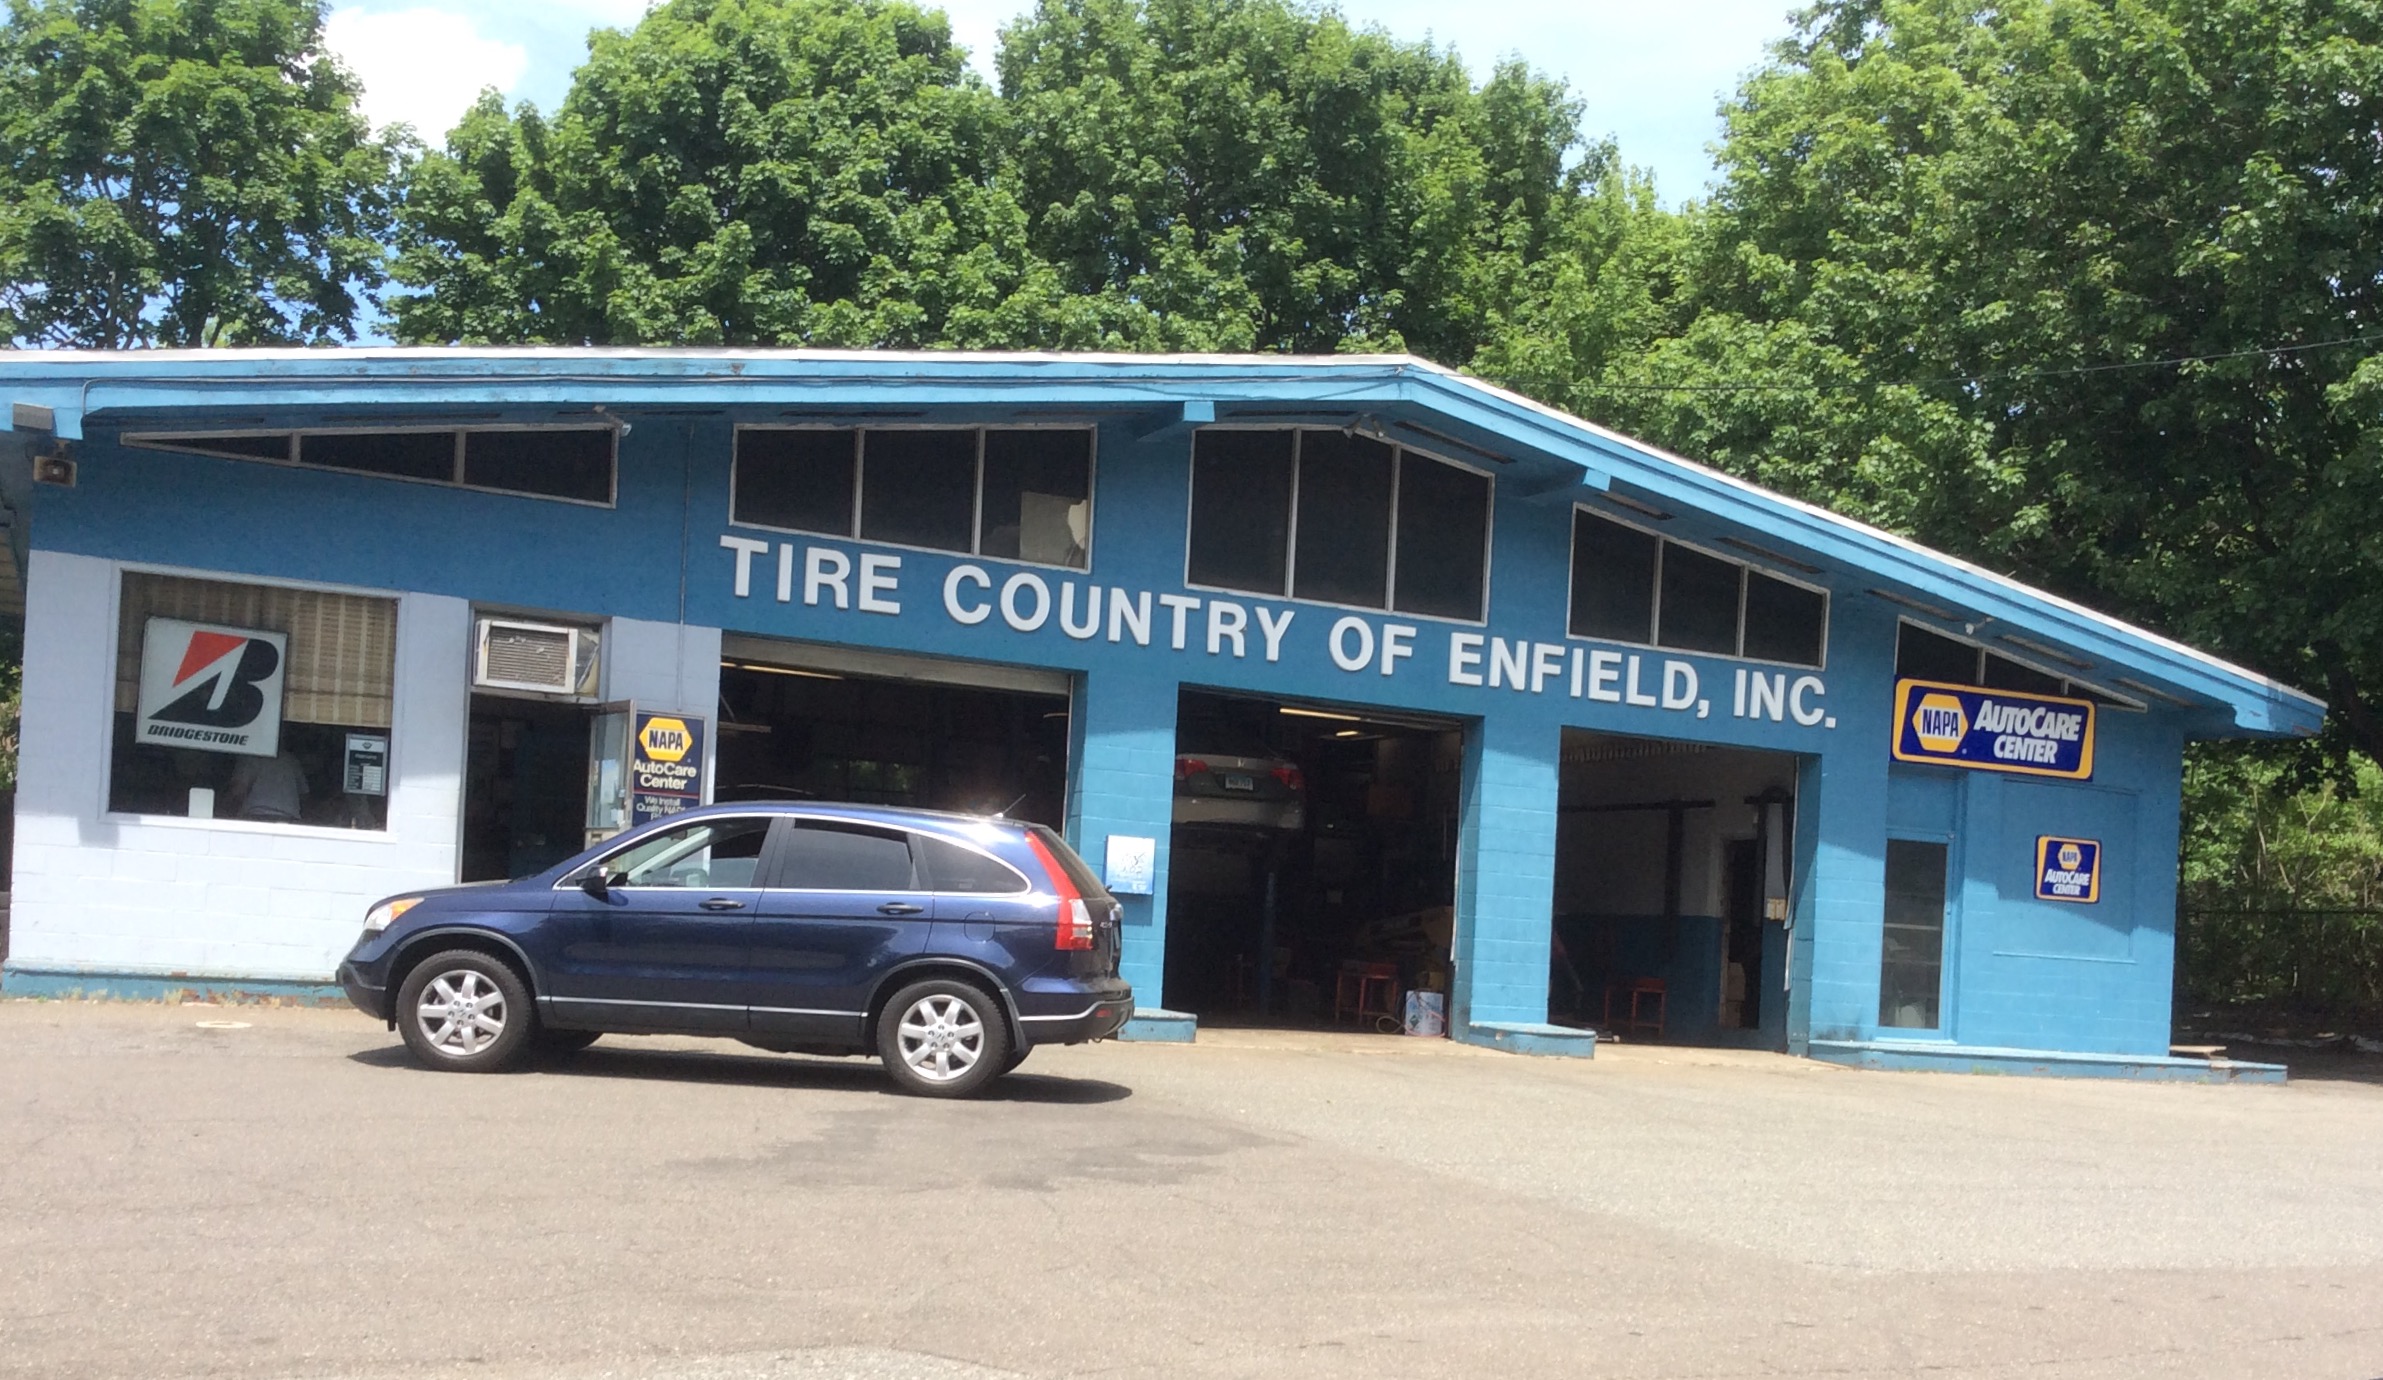 Tire Country of Enfield auto garage during the daytime